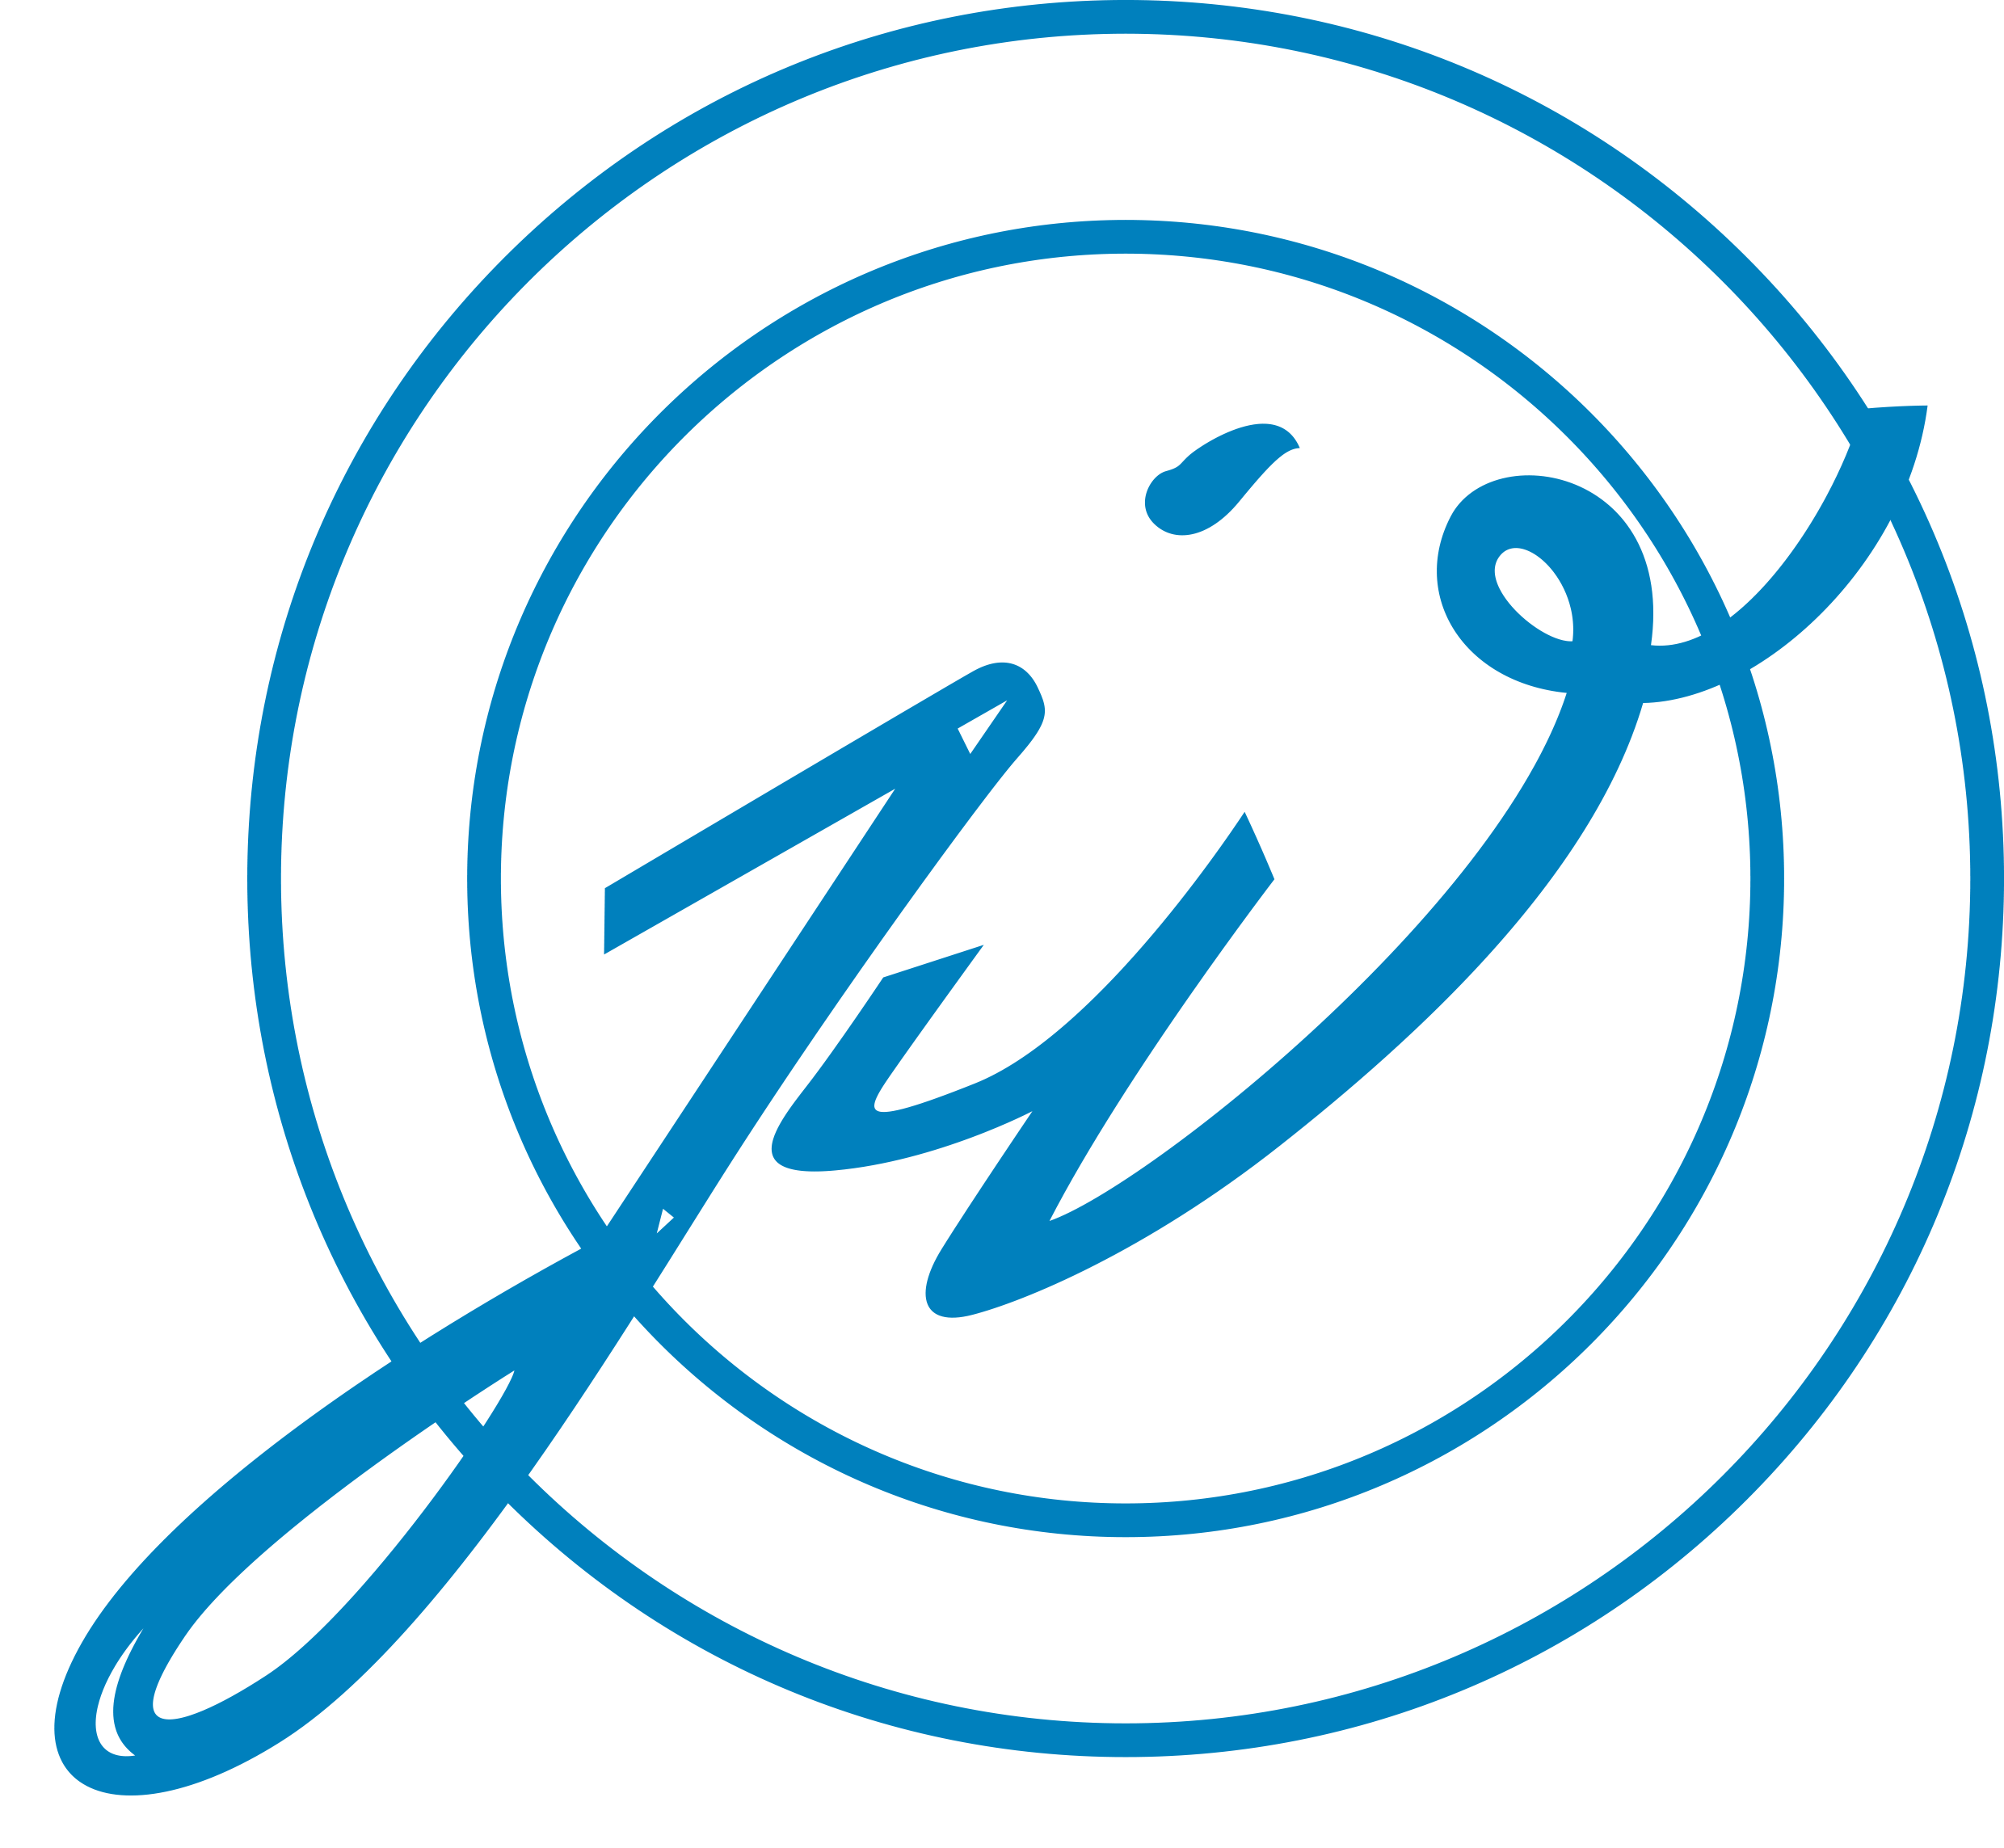 The Jayson Wells Experience